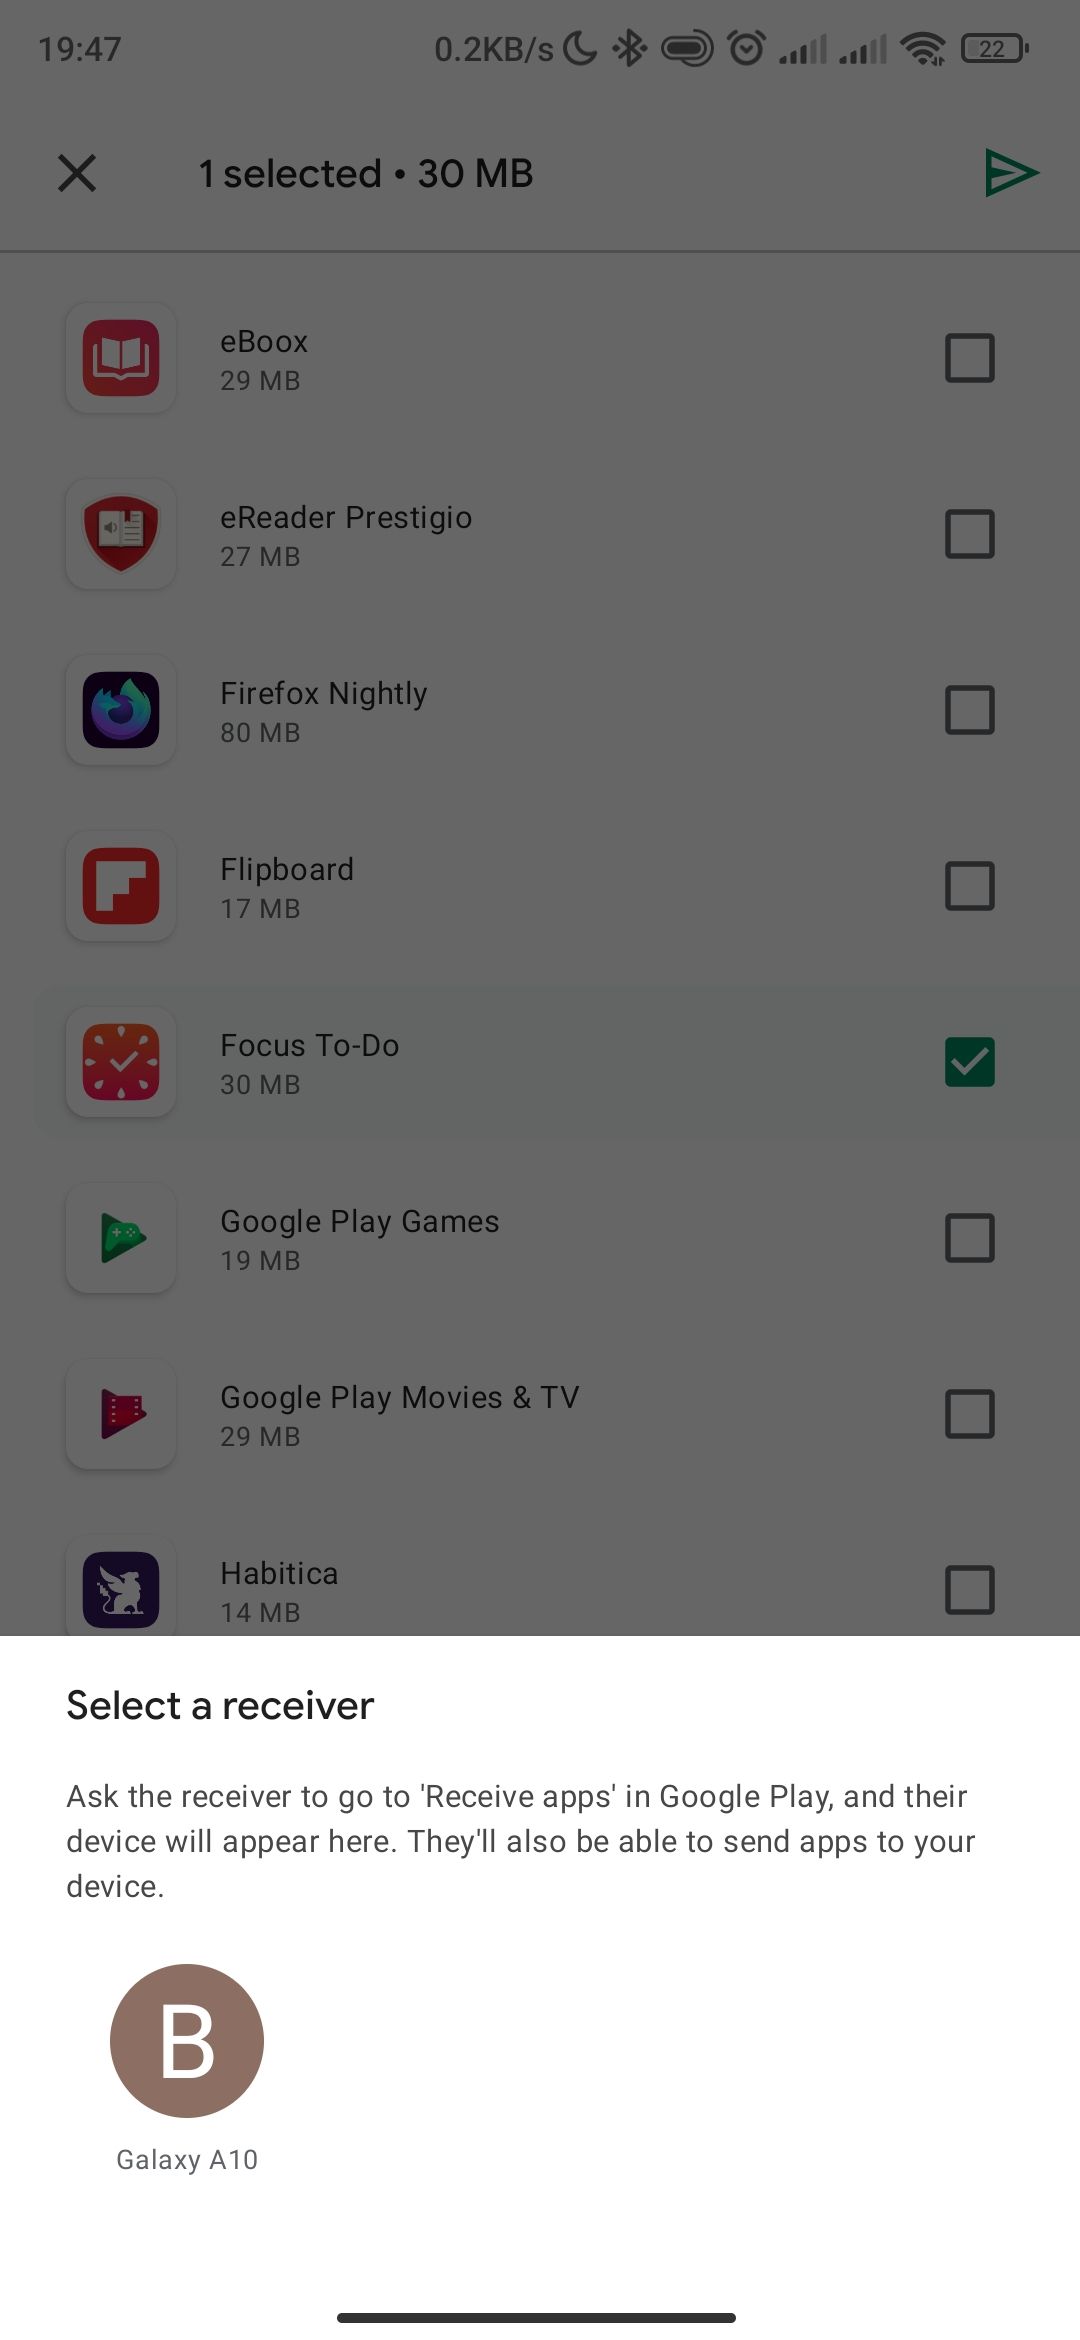 Selecting a device to share apps with